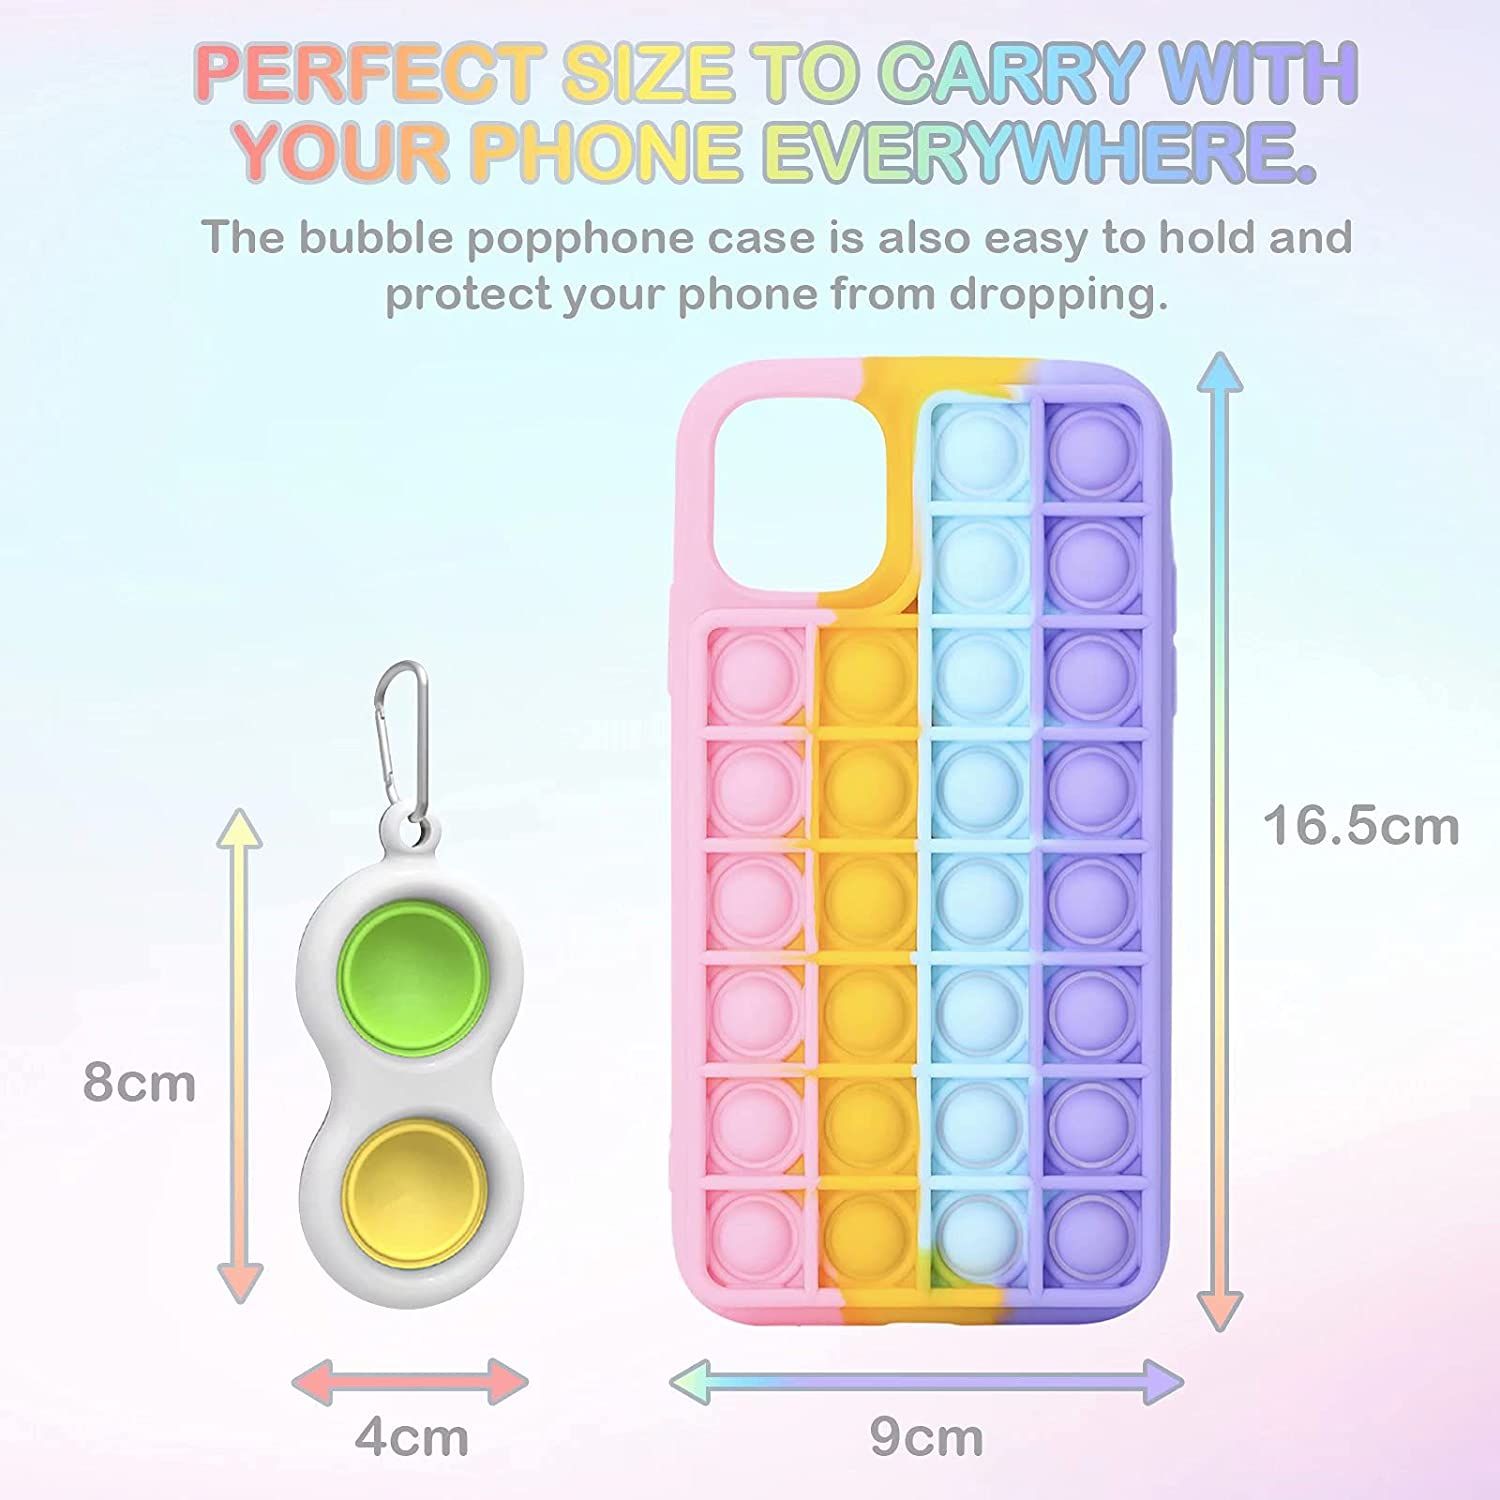 Fidget Toy Pop Phone Case dimensions and features